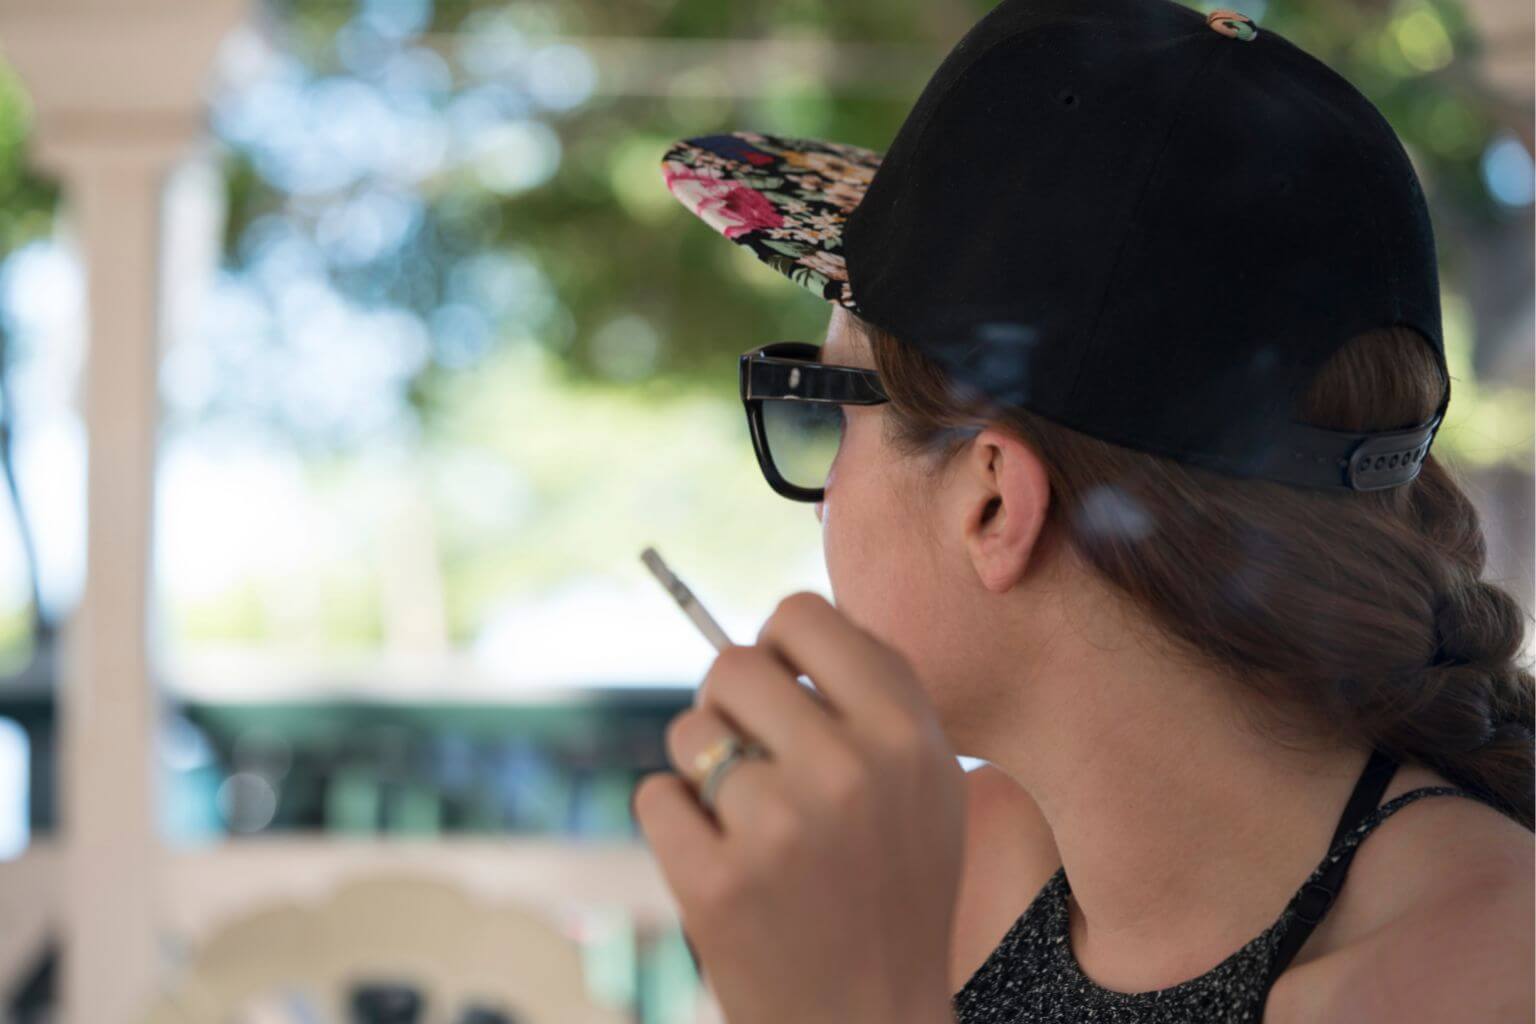 Woman smoking on vacation in Mexico